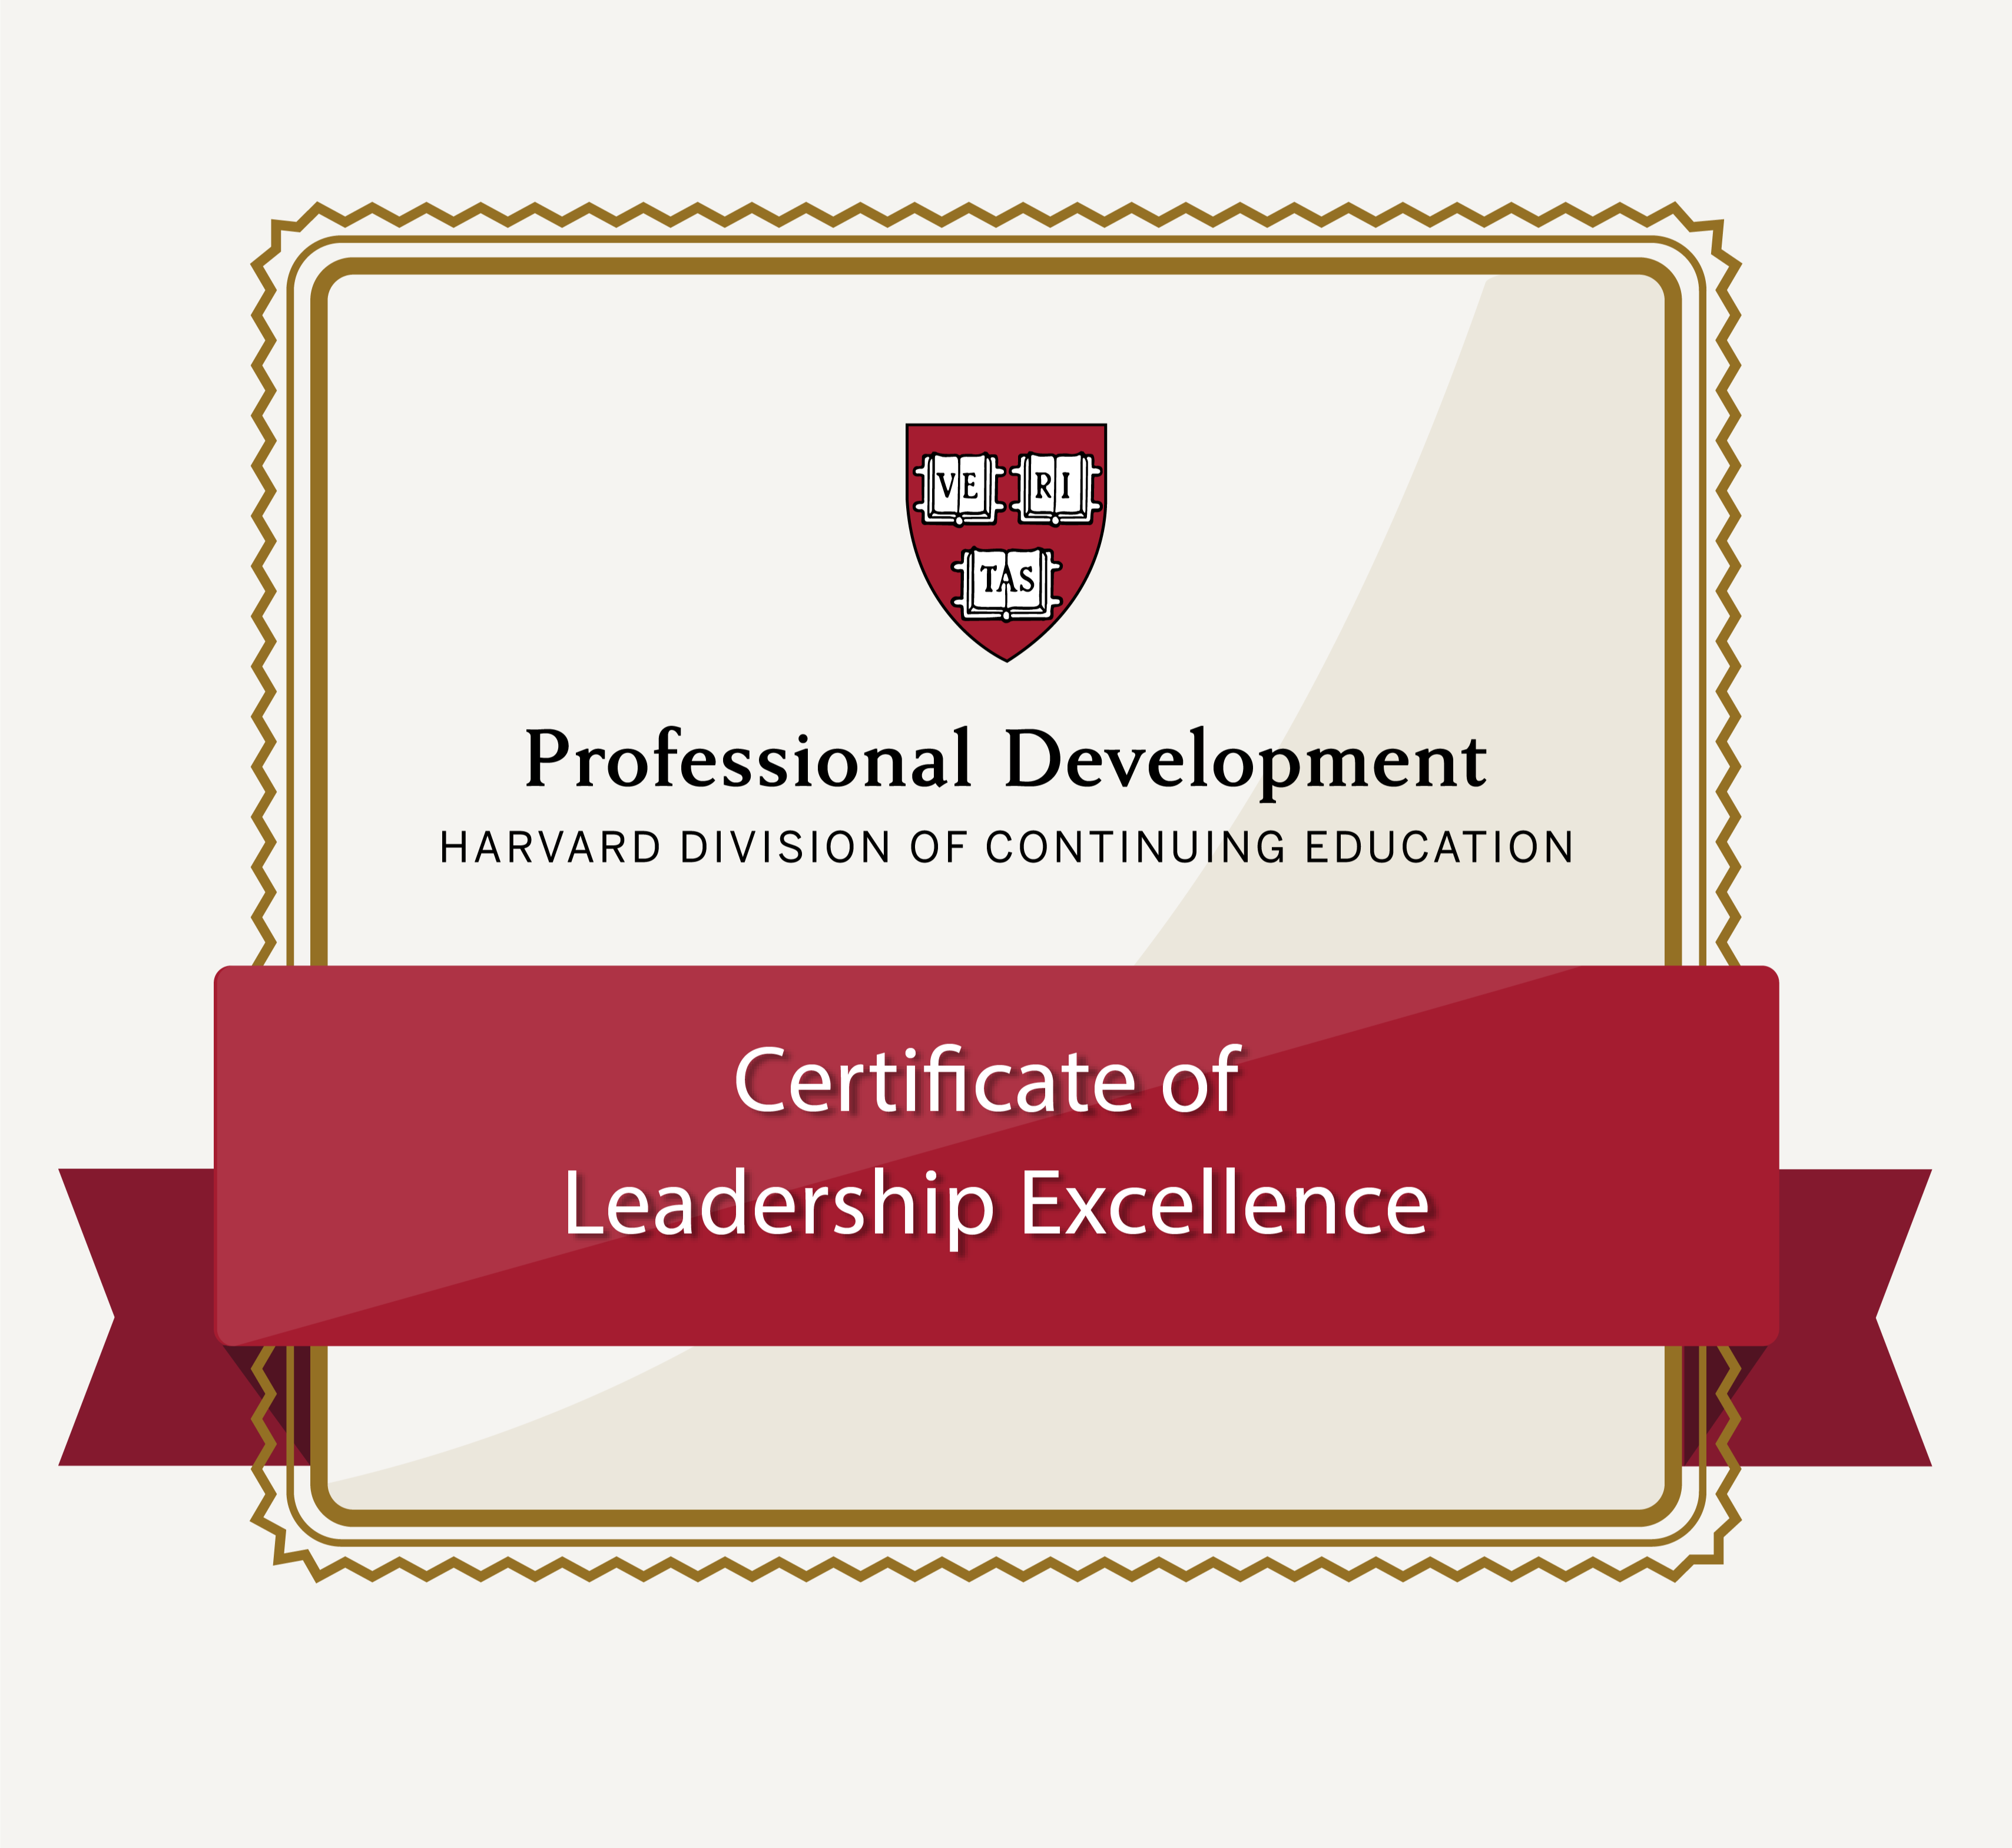 Certificates of Leadership Excellence Professional Development